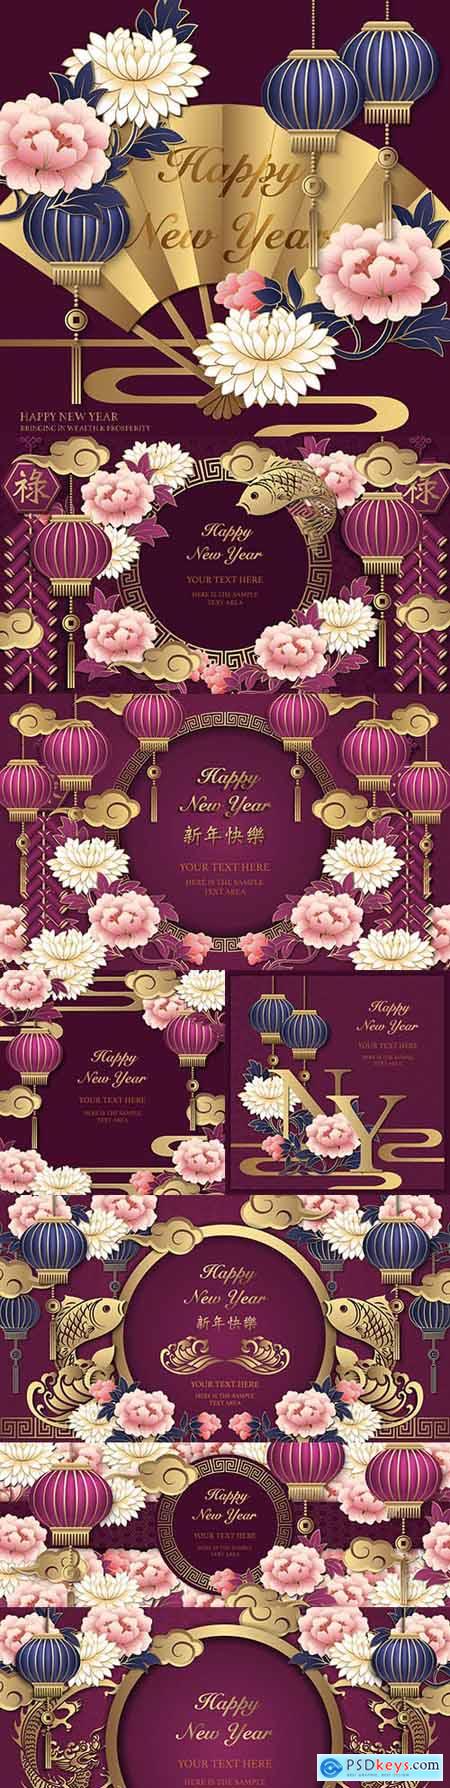 Colorful Chinese New Year 2021 design illustration